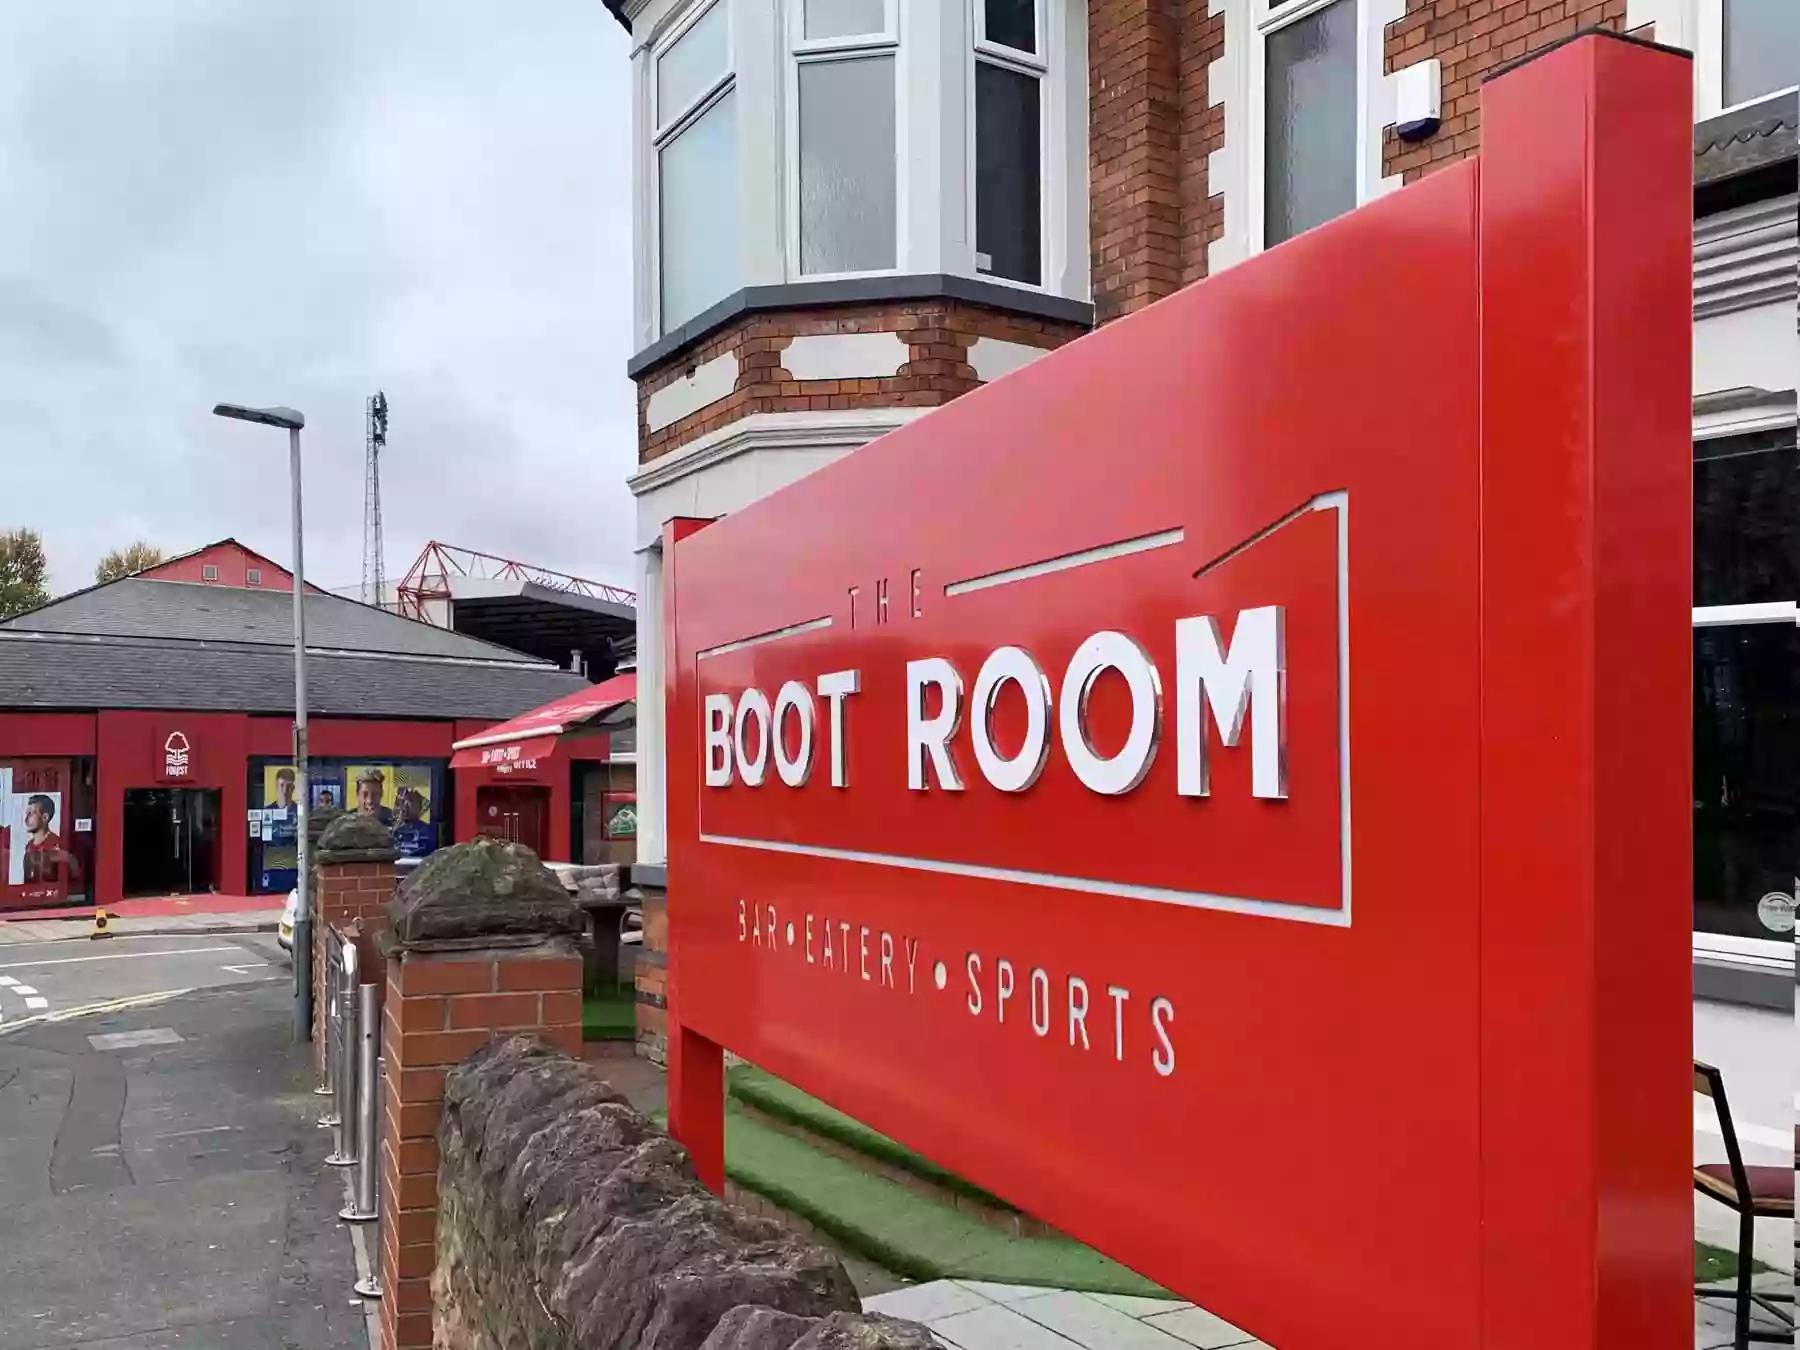 The Boot Room